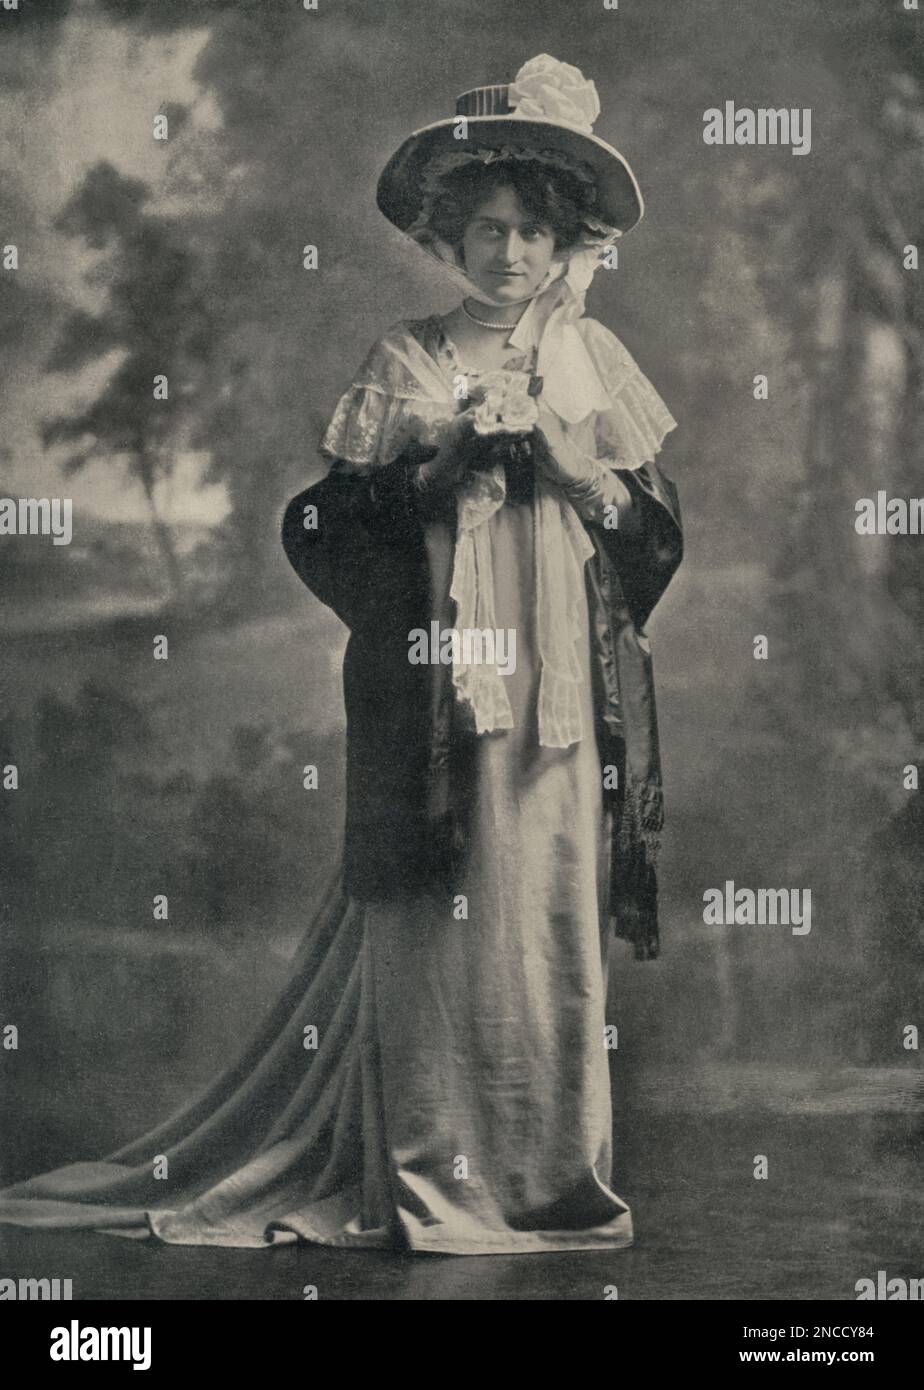 Maude Fealy - photo by Lafayette Studio (London) 1904 or 1905 - as 'Julie' in 'The Lyon's Mail' - restored from original copy of a 1905 publication by Montana Photographer Stock Photo